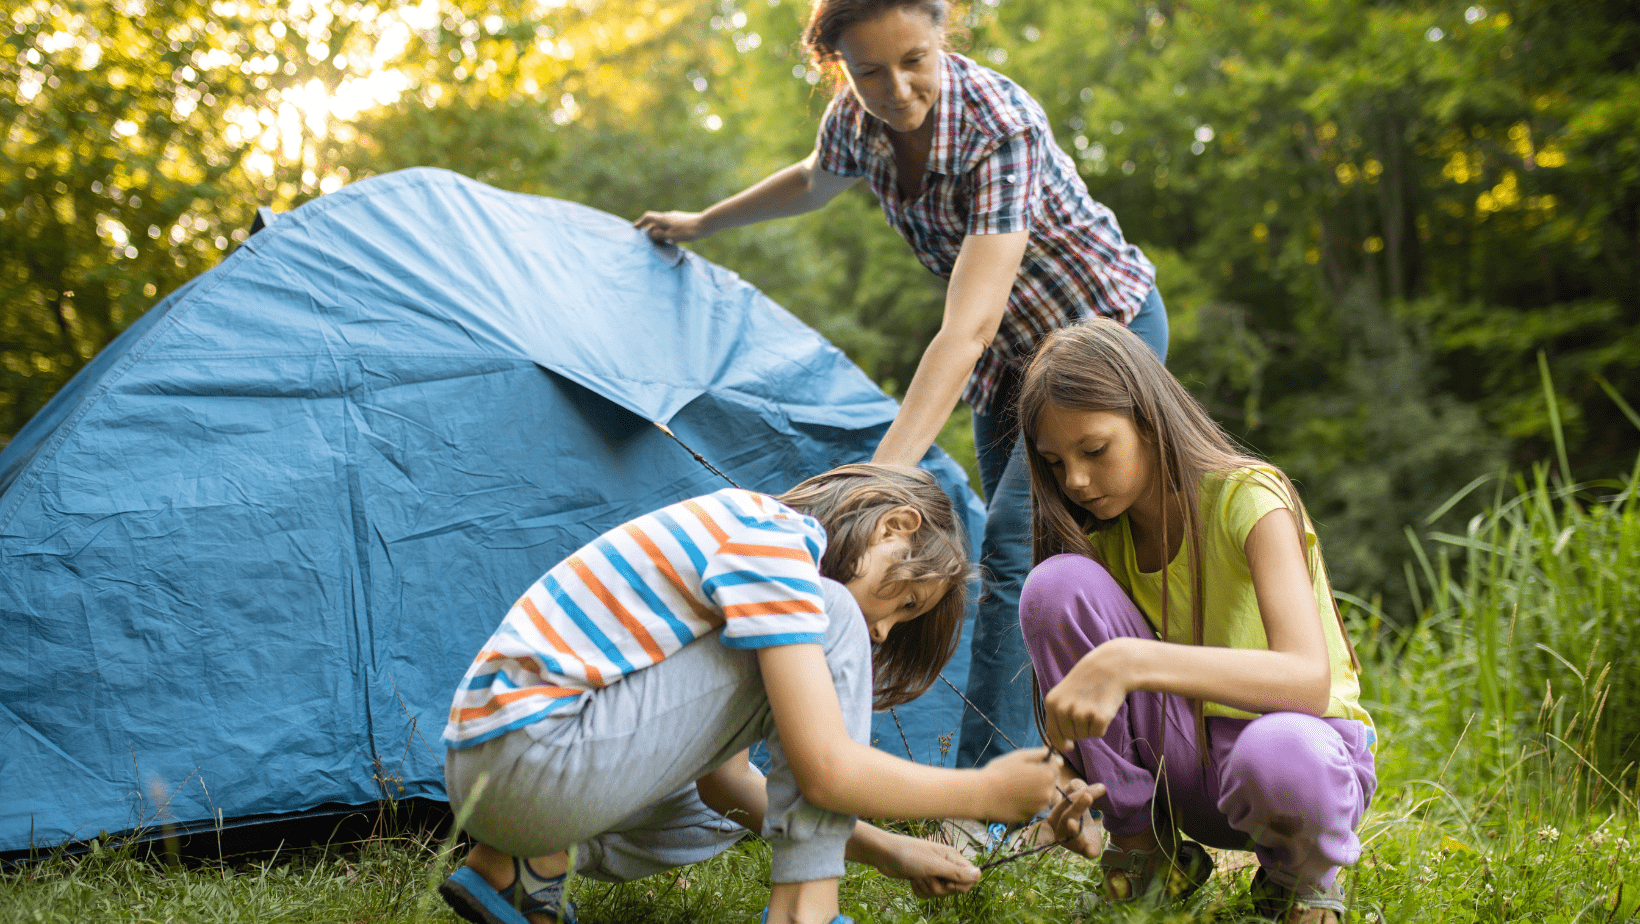 Camping Hacks: 8 Tips to Set Up Camp like a Pro